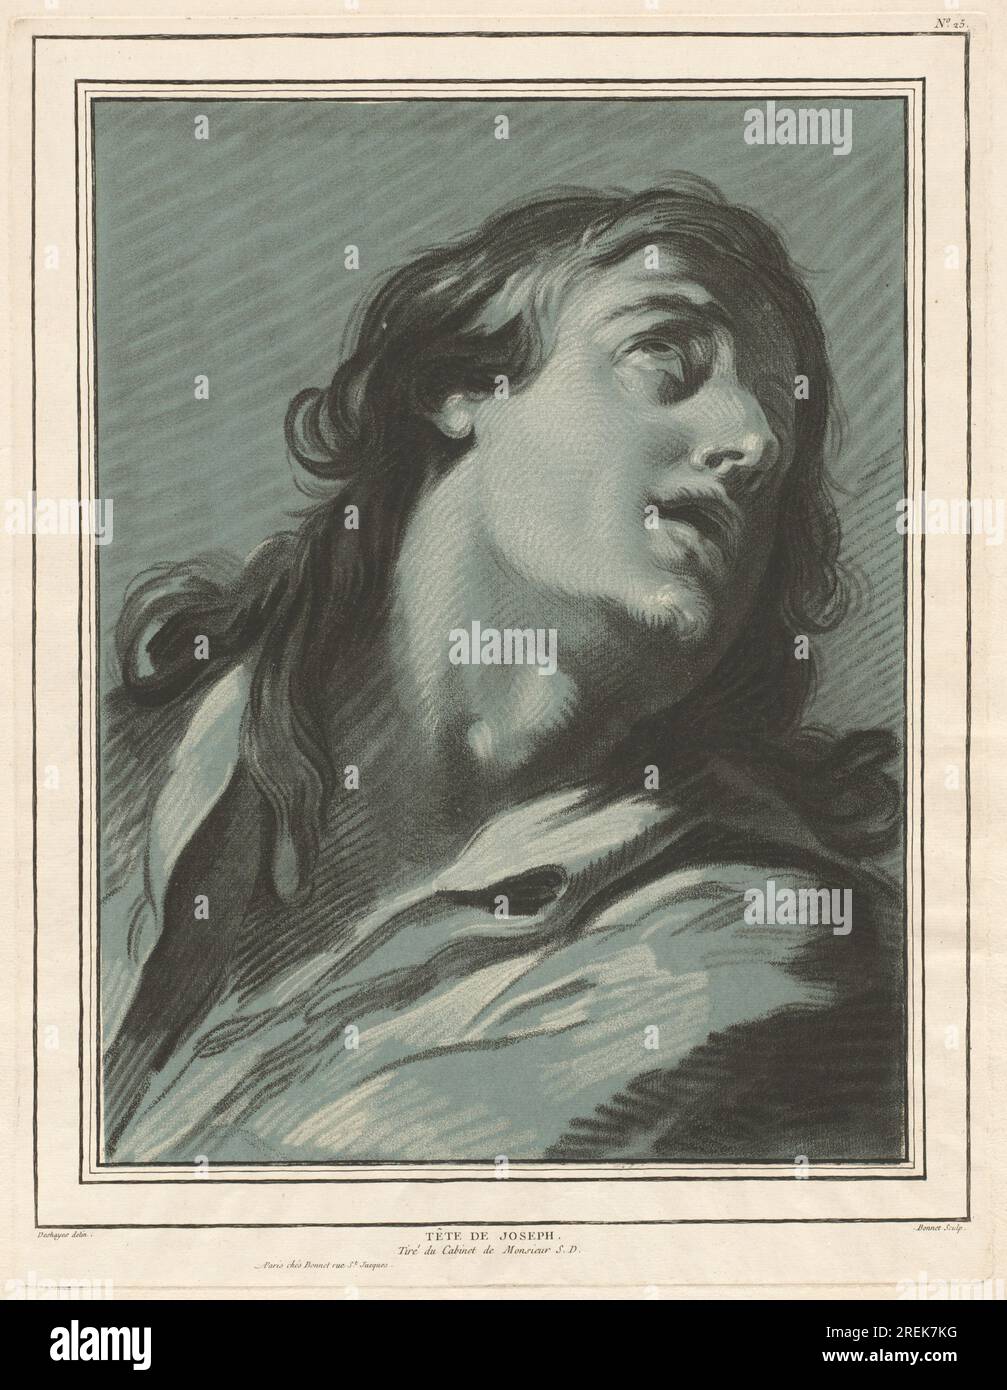 'Louis-Marin Bonnet, after Jean-Baptiste Deshays, Tête de Joseph (Head of Joseph), 1773, chalk manner printed from two plates in black and white on blue laid paper, plate: 51.2 × 39.5 cm (20 3/16 × 15 9/16 in.) sheet: 58.8 × 44.4 cm (23 1/8 × 17 1/2 in.), Purchase as the Gift of Ivan and Winifred Phillips in Honor of Margaret Morgan Grasselli, 2017.6.1' Stock Photo